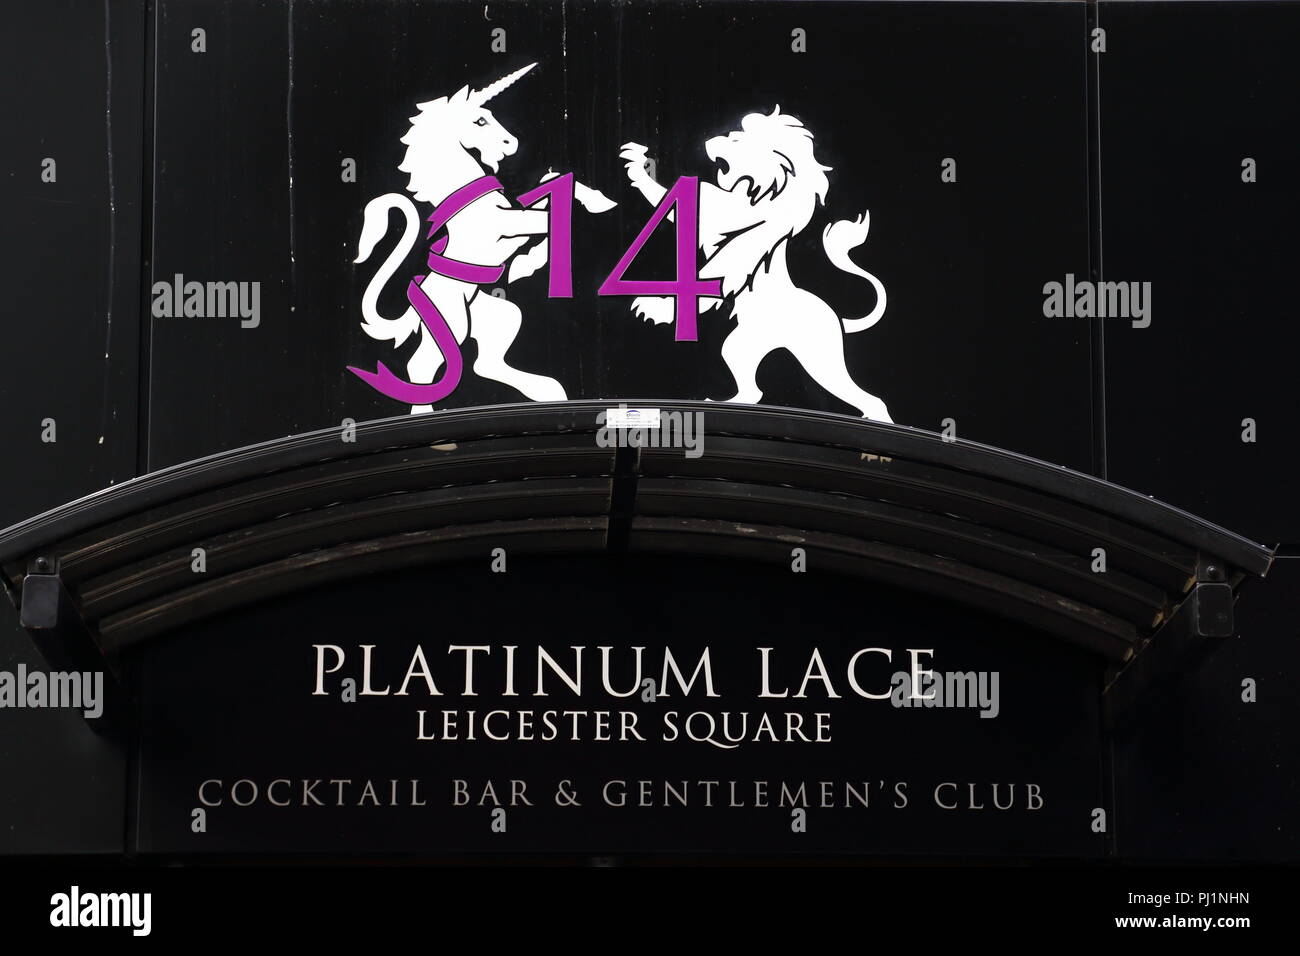 Logo above the entrance to the Platinum Lace Gentlemen's Club in Leicester Square, London, UK Stock Photo